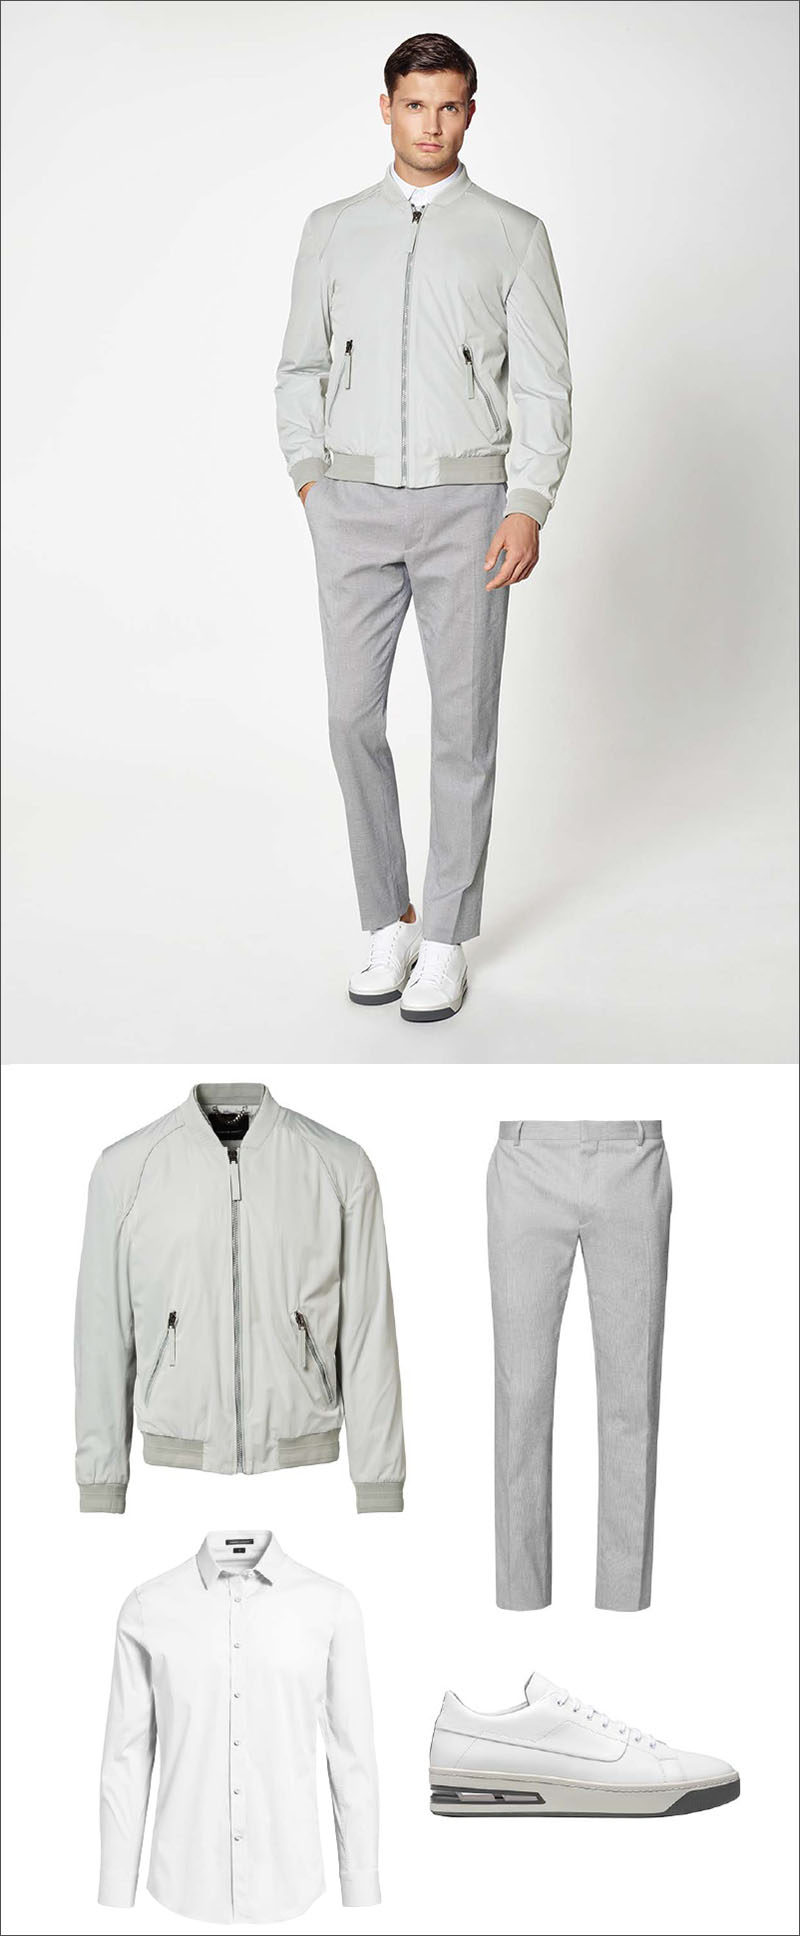 Men's Fashion Ideas - 17 Men's Outfits From Porsche Design's 2017 Spring/Summer Collection | This sophisticated yet casual men's outfit was created using a simple light grey jacket, a pair of light grey trousers, a crisp white collared shirt, and clean white sneakers.